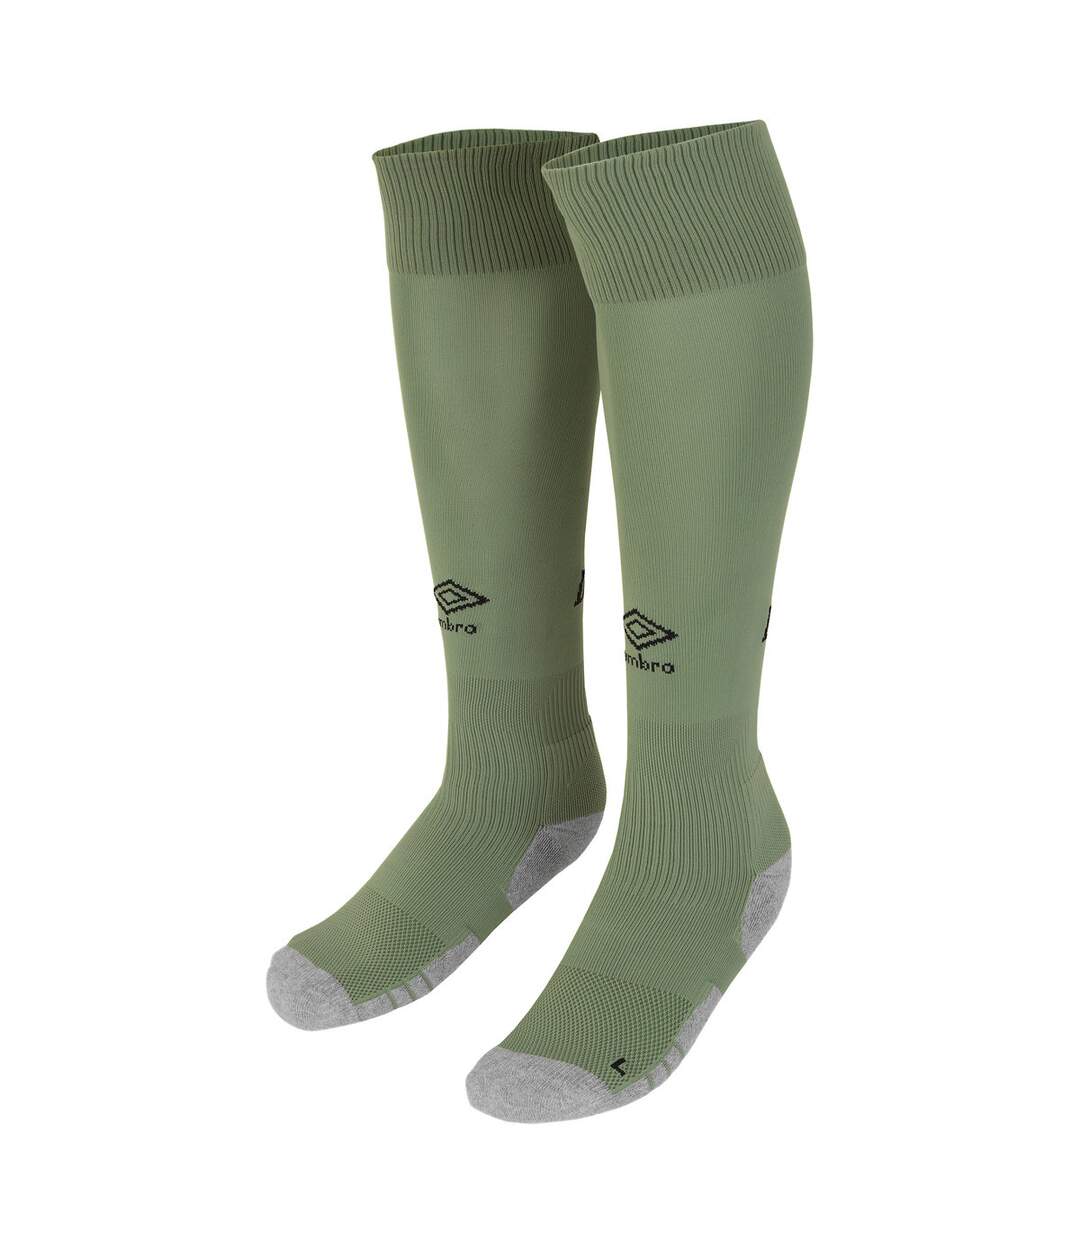 Derby County FC - Chaussettes de foot 22/23 - Homme (Vert) - UTUO484